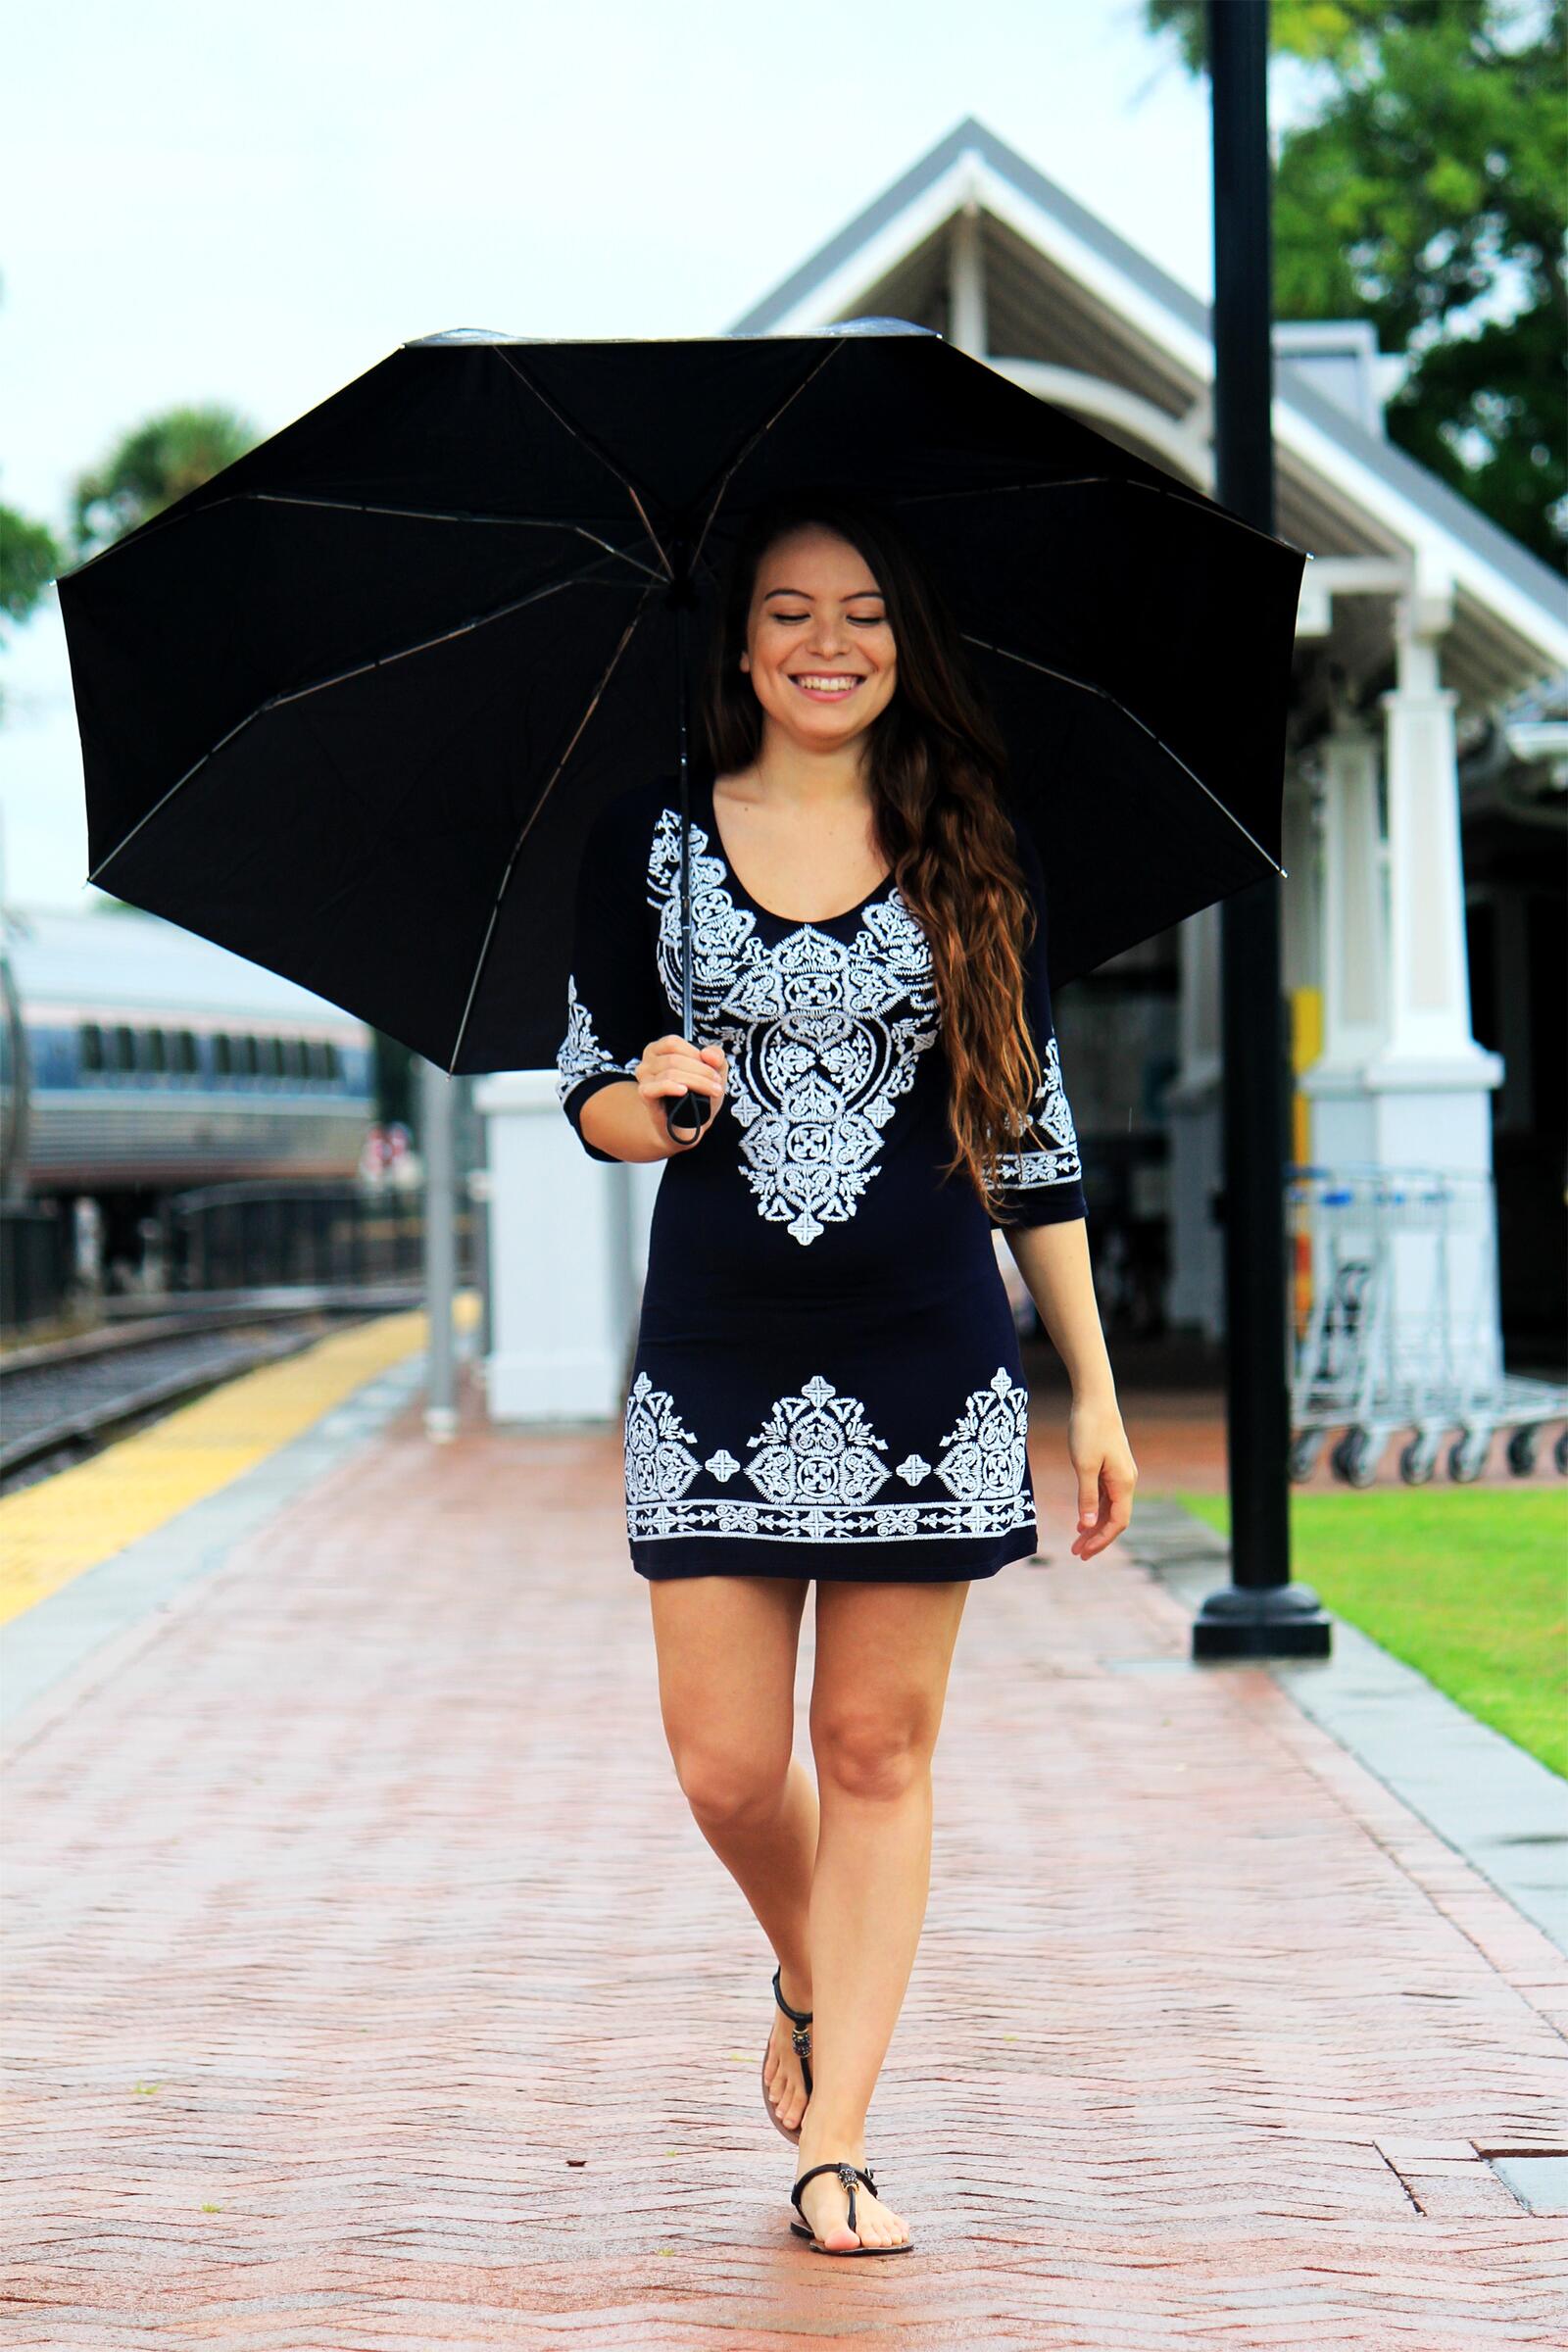 Free photo Beautiful girl in a dress hides from the sun under an umbrella